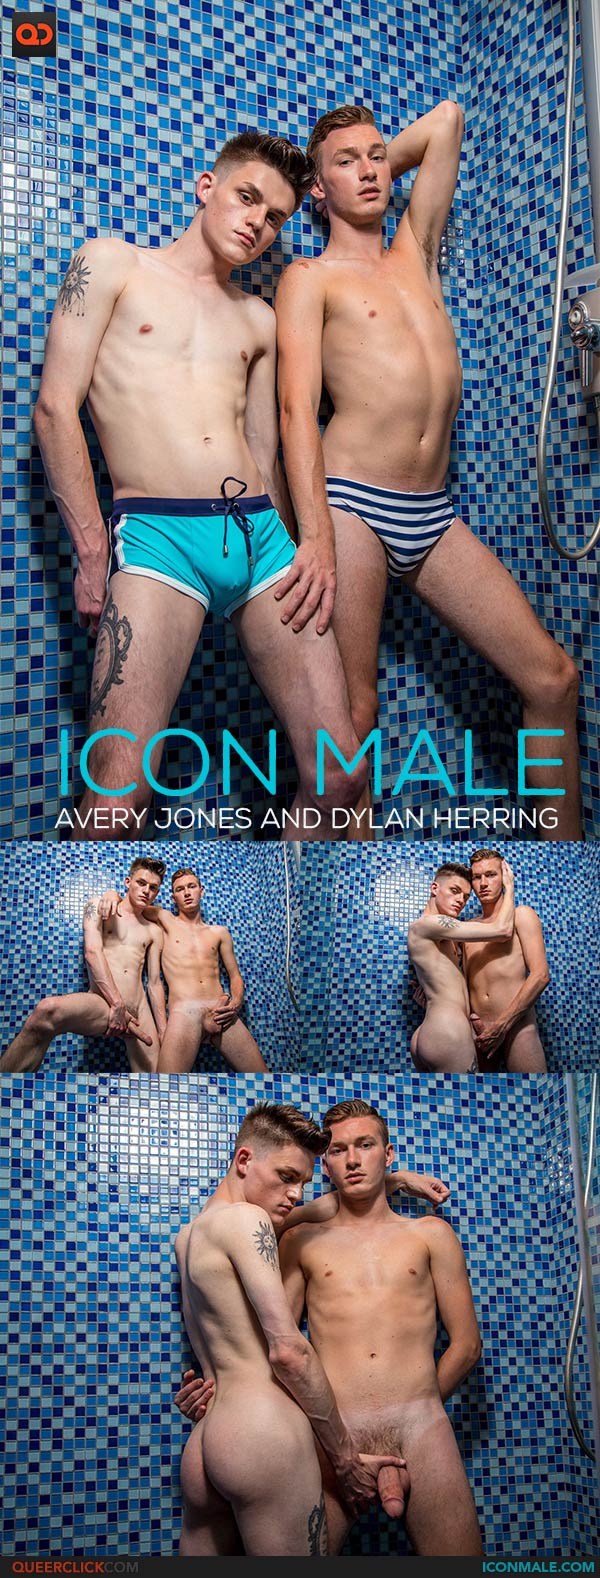 IconMale: Avery Jones and Dylan Herring